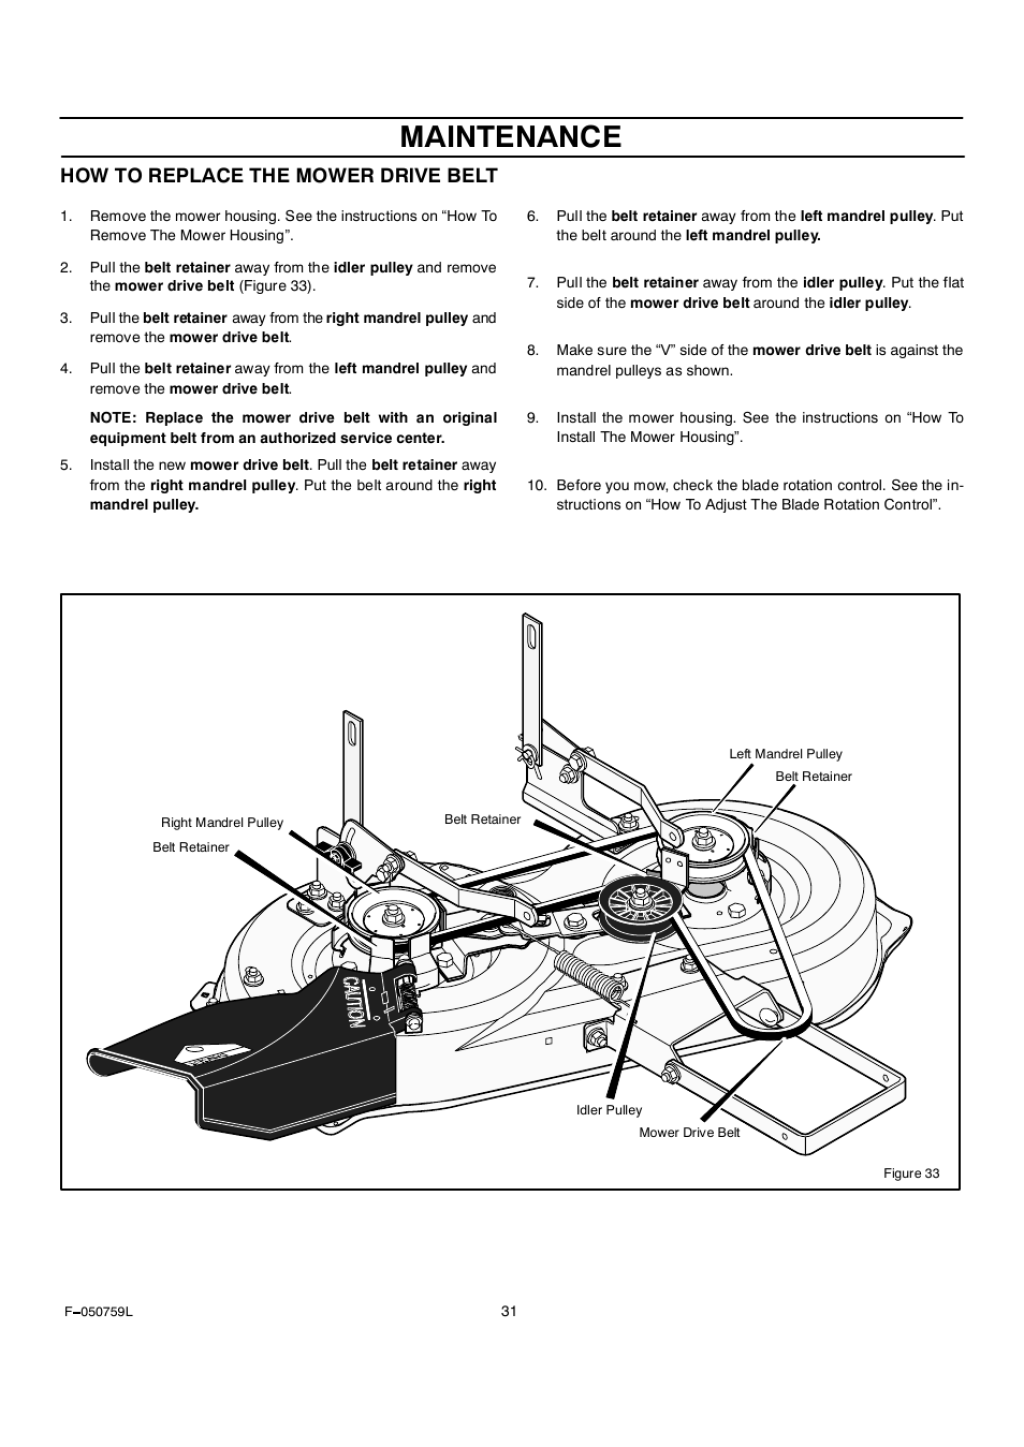 Picture of: Maintenance, How to replace the mower drive belt  Rover Clipper